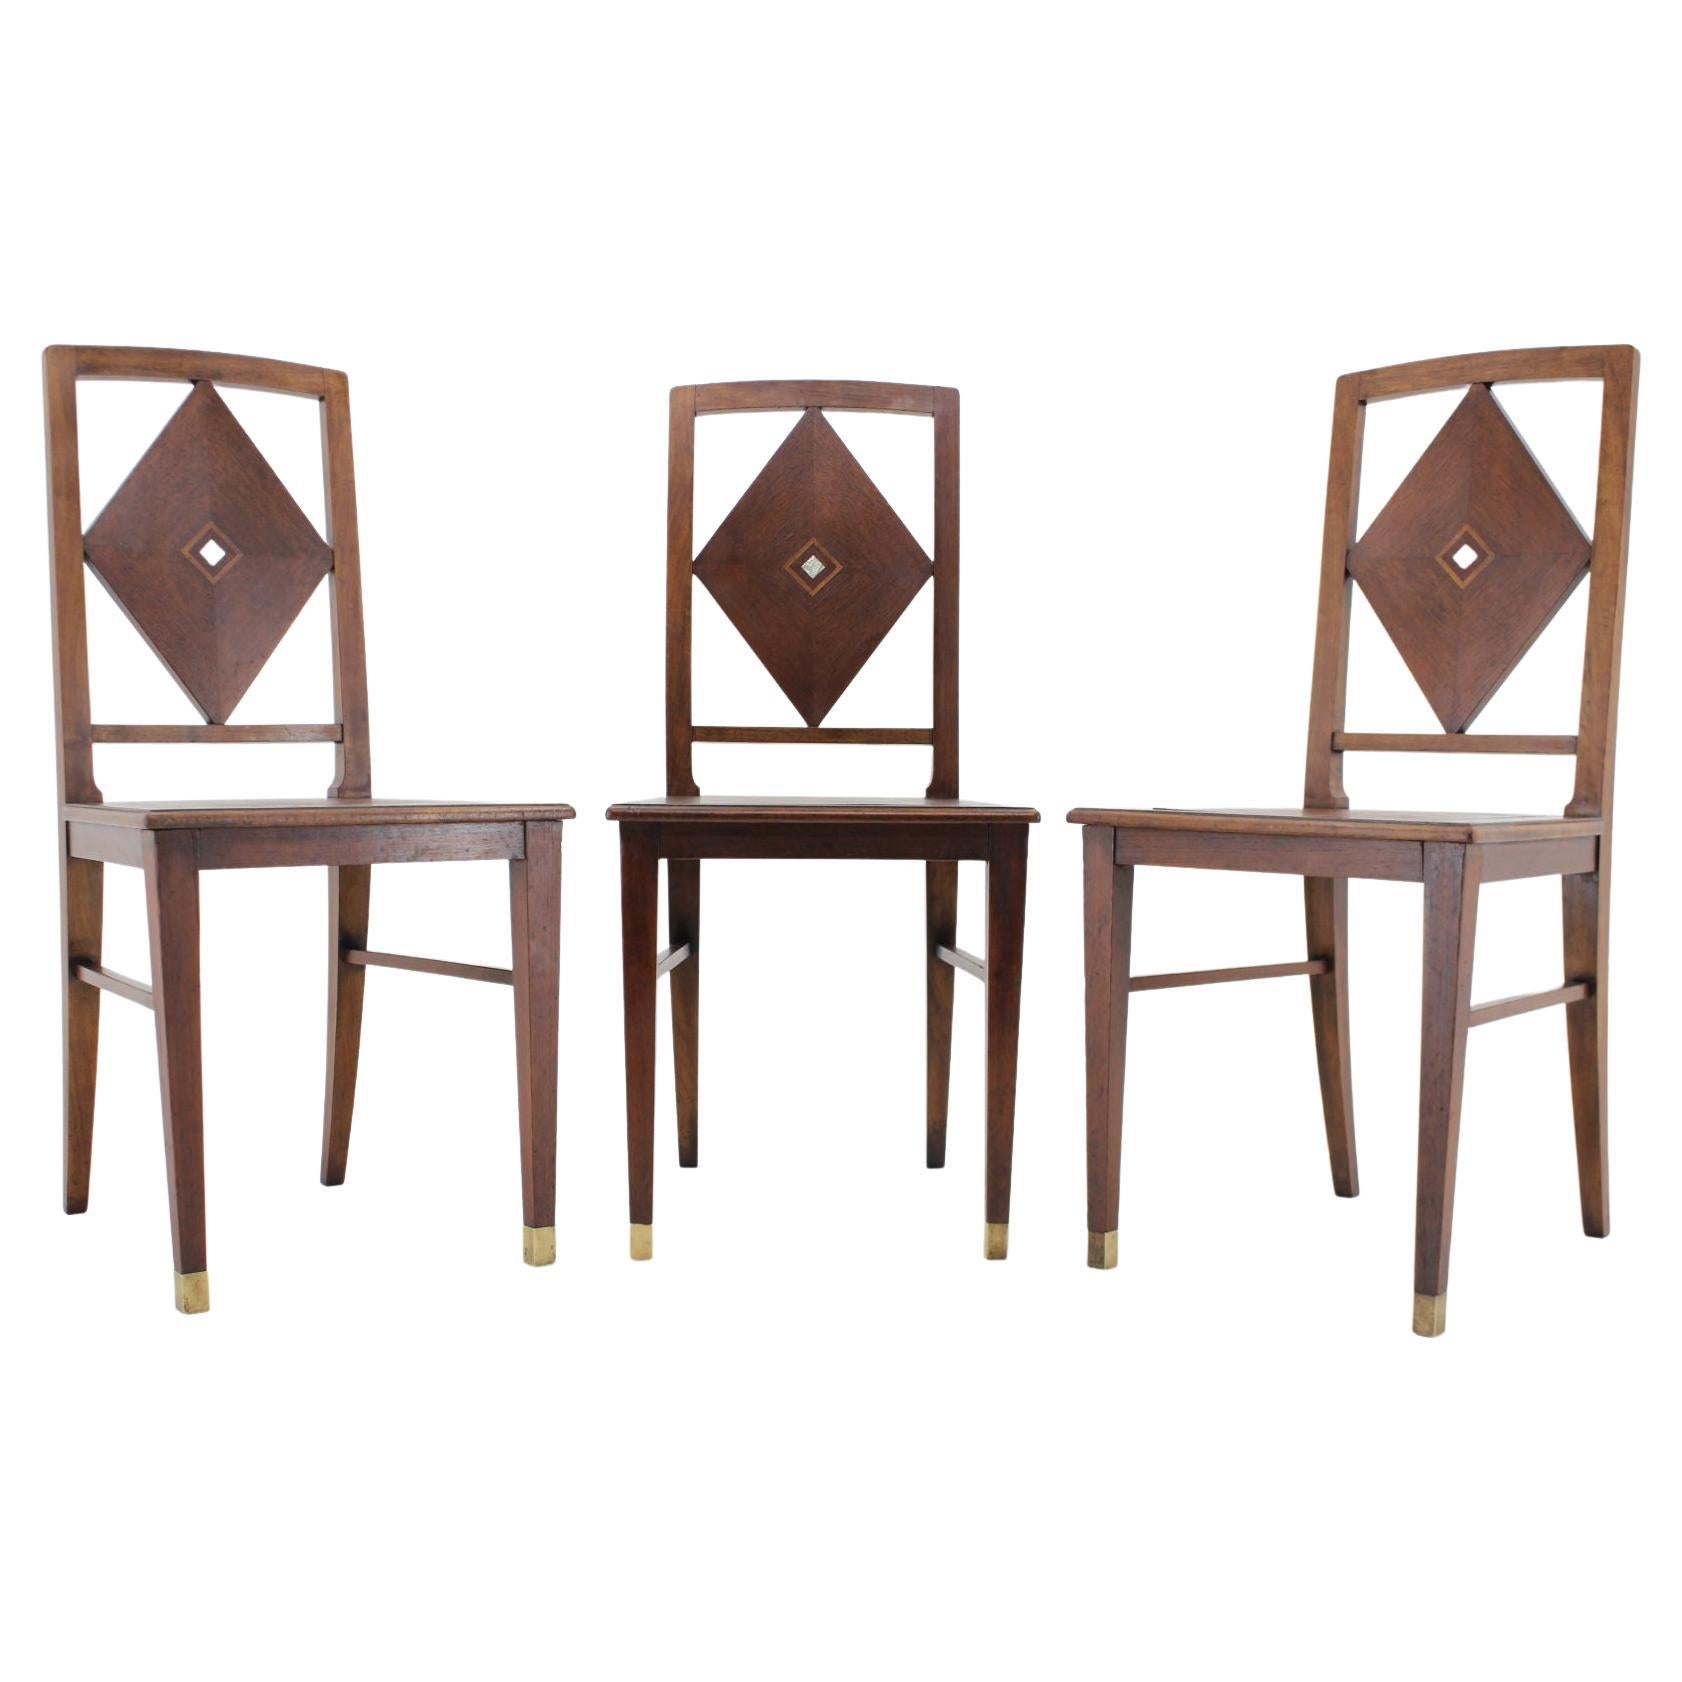 Art Nouveau Dinning Chair, 1910s, Up to Three Items